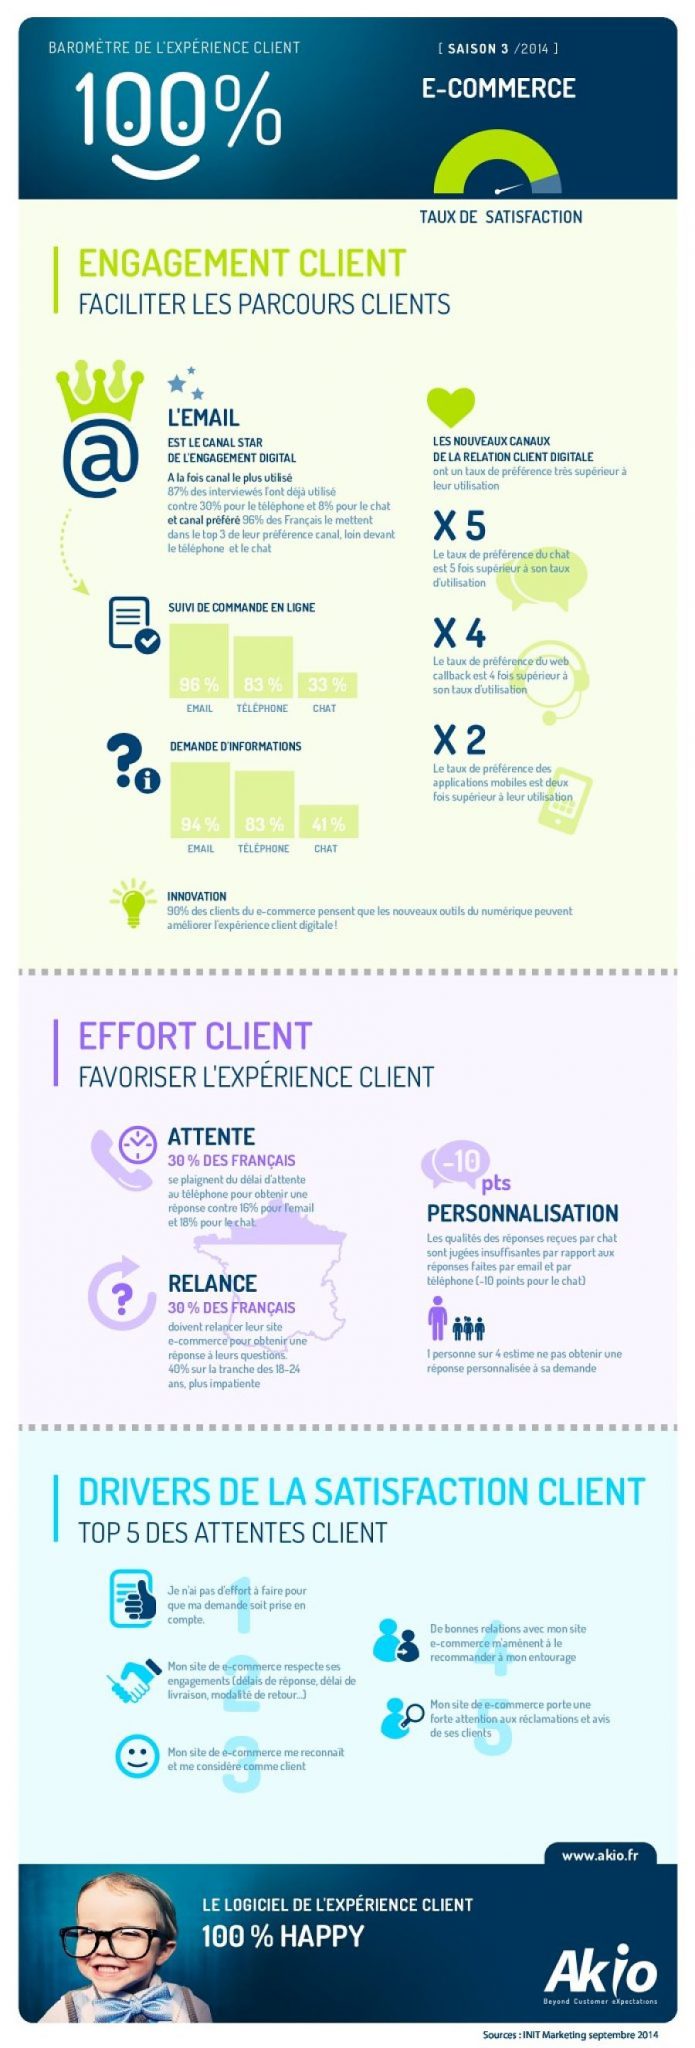 Infographie Ecommerce Experience client AKIO